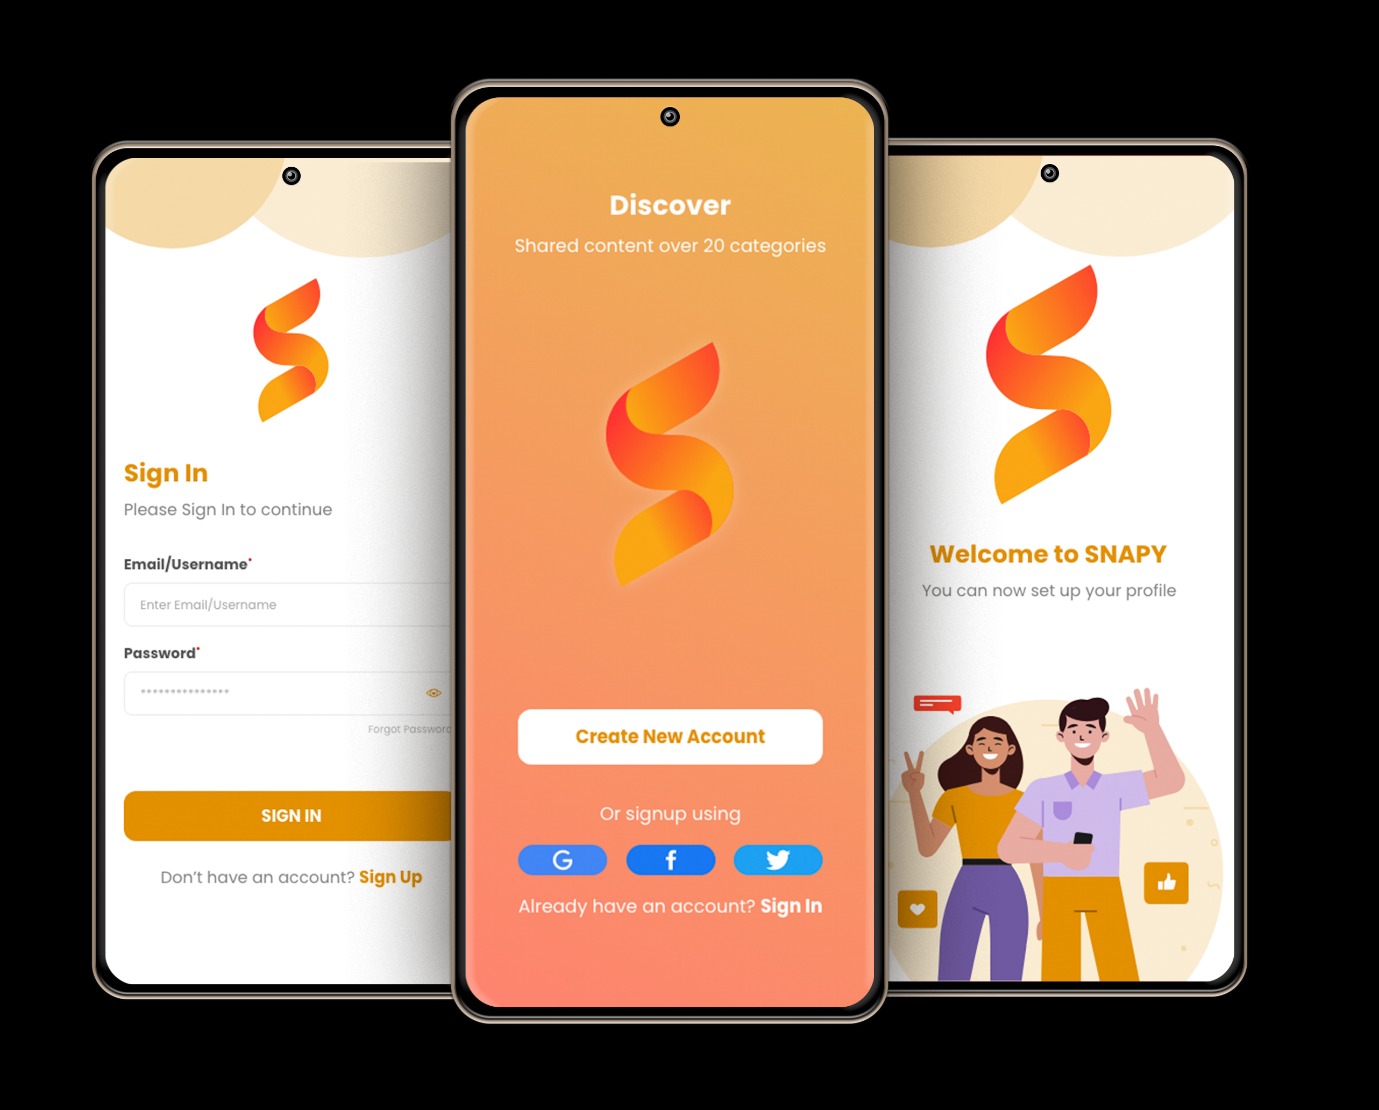 , SNAPY – launches snap to earn feature to earn cryptocurrency without investing money.